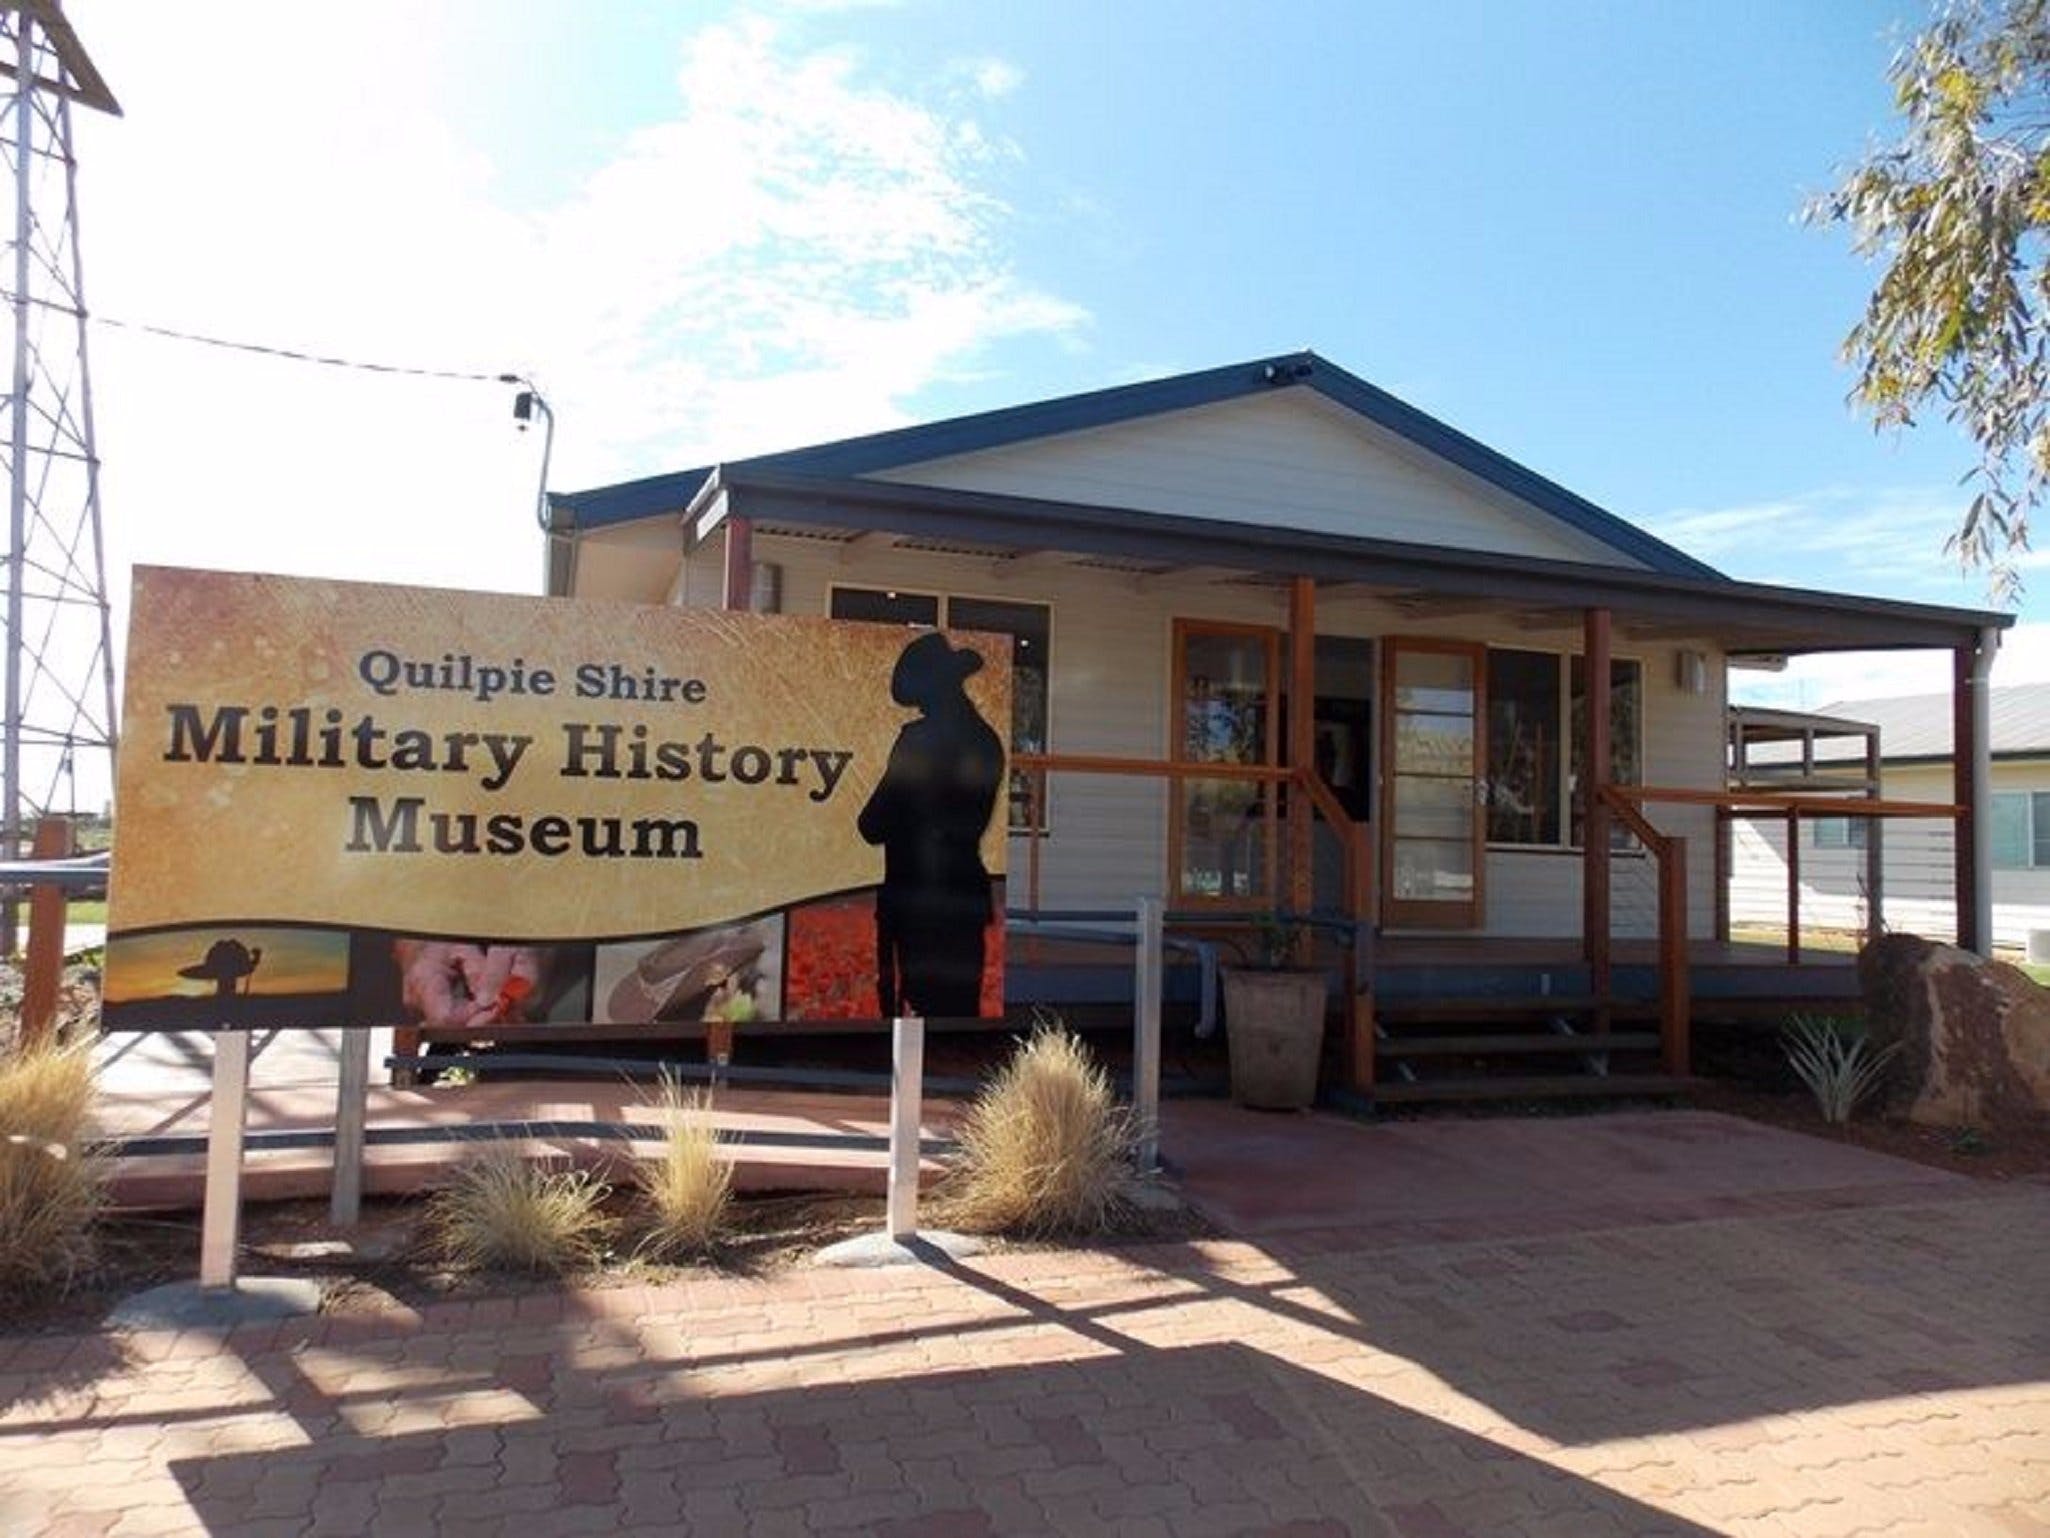 Quilpie Shire Military History Museum - Find Attractions